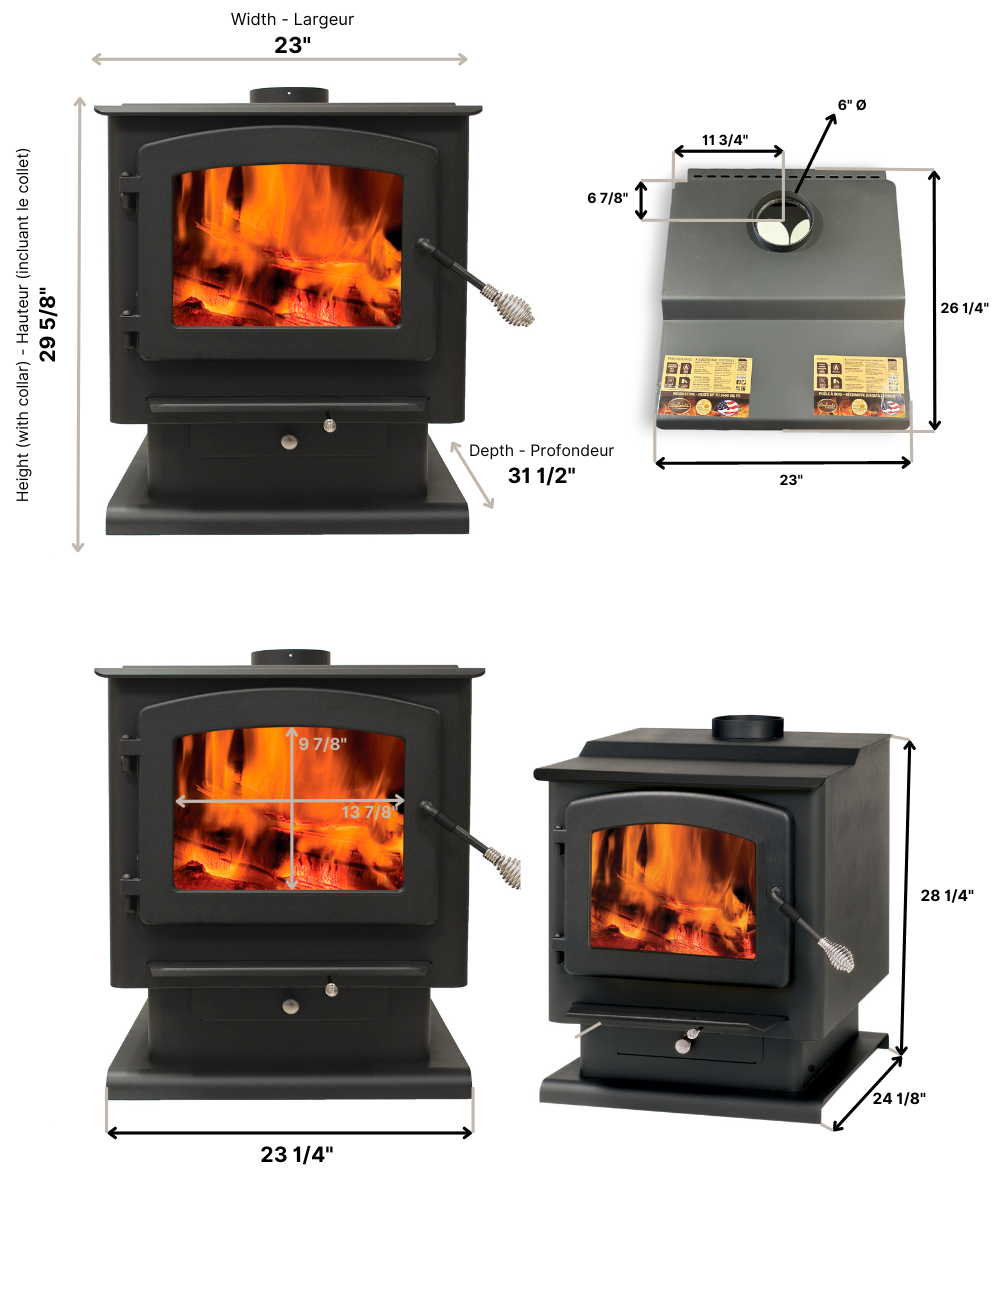 32-NC Wood Stove - EPA Certified - Heats up to 2,400 sq. ft. - up to 20  Logs - Pedestal Model with/without glass overlay - Made in USA.